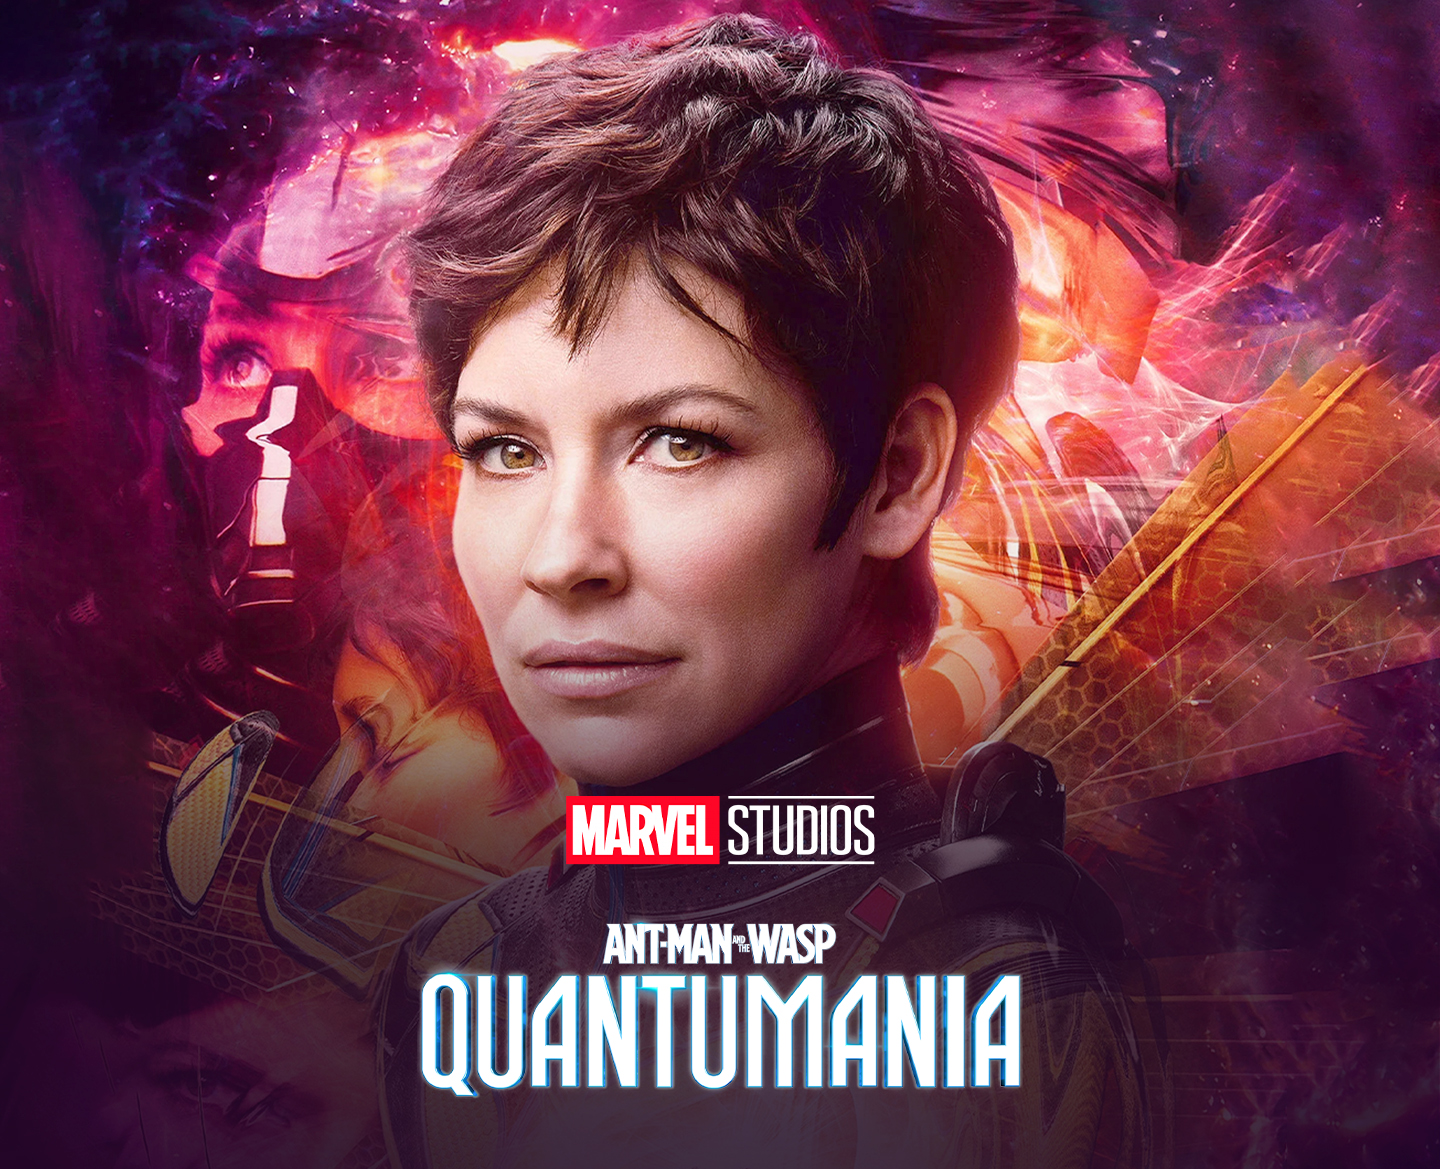 Ant-Man and the Wasp: Quantumania - TEASER TRAILER (2023